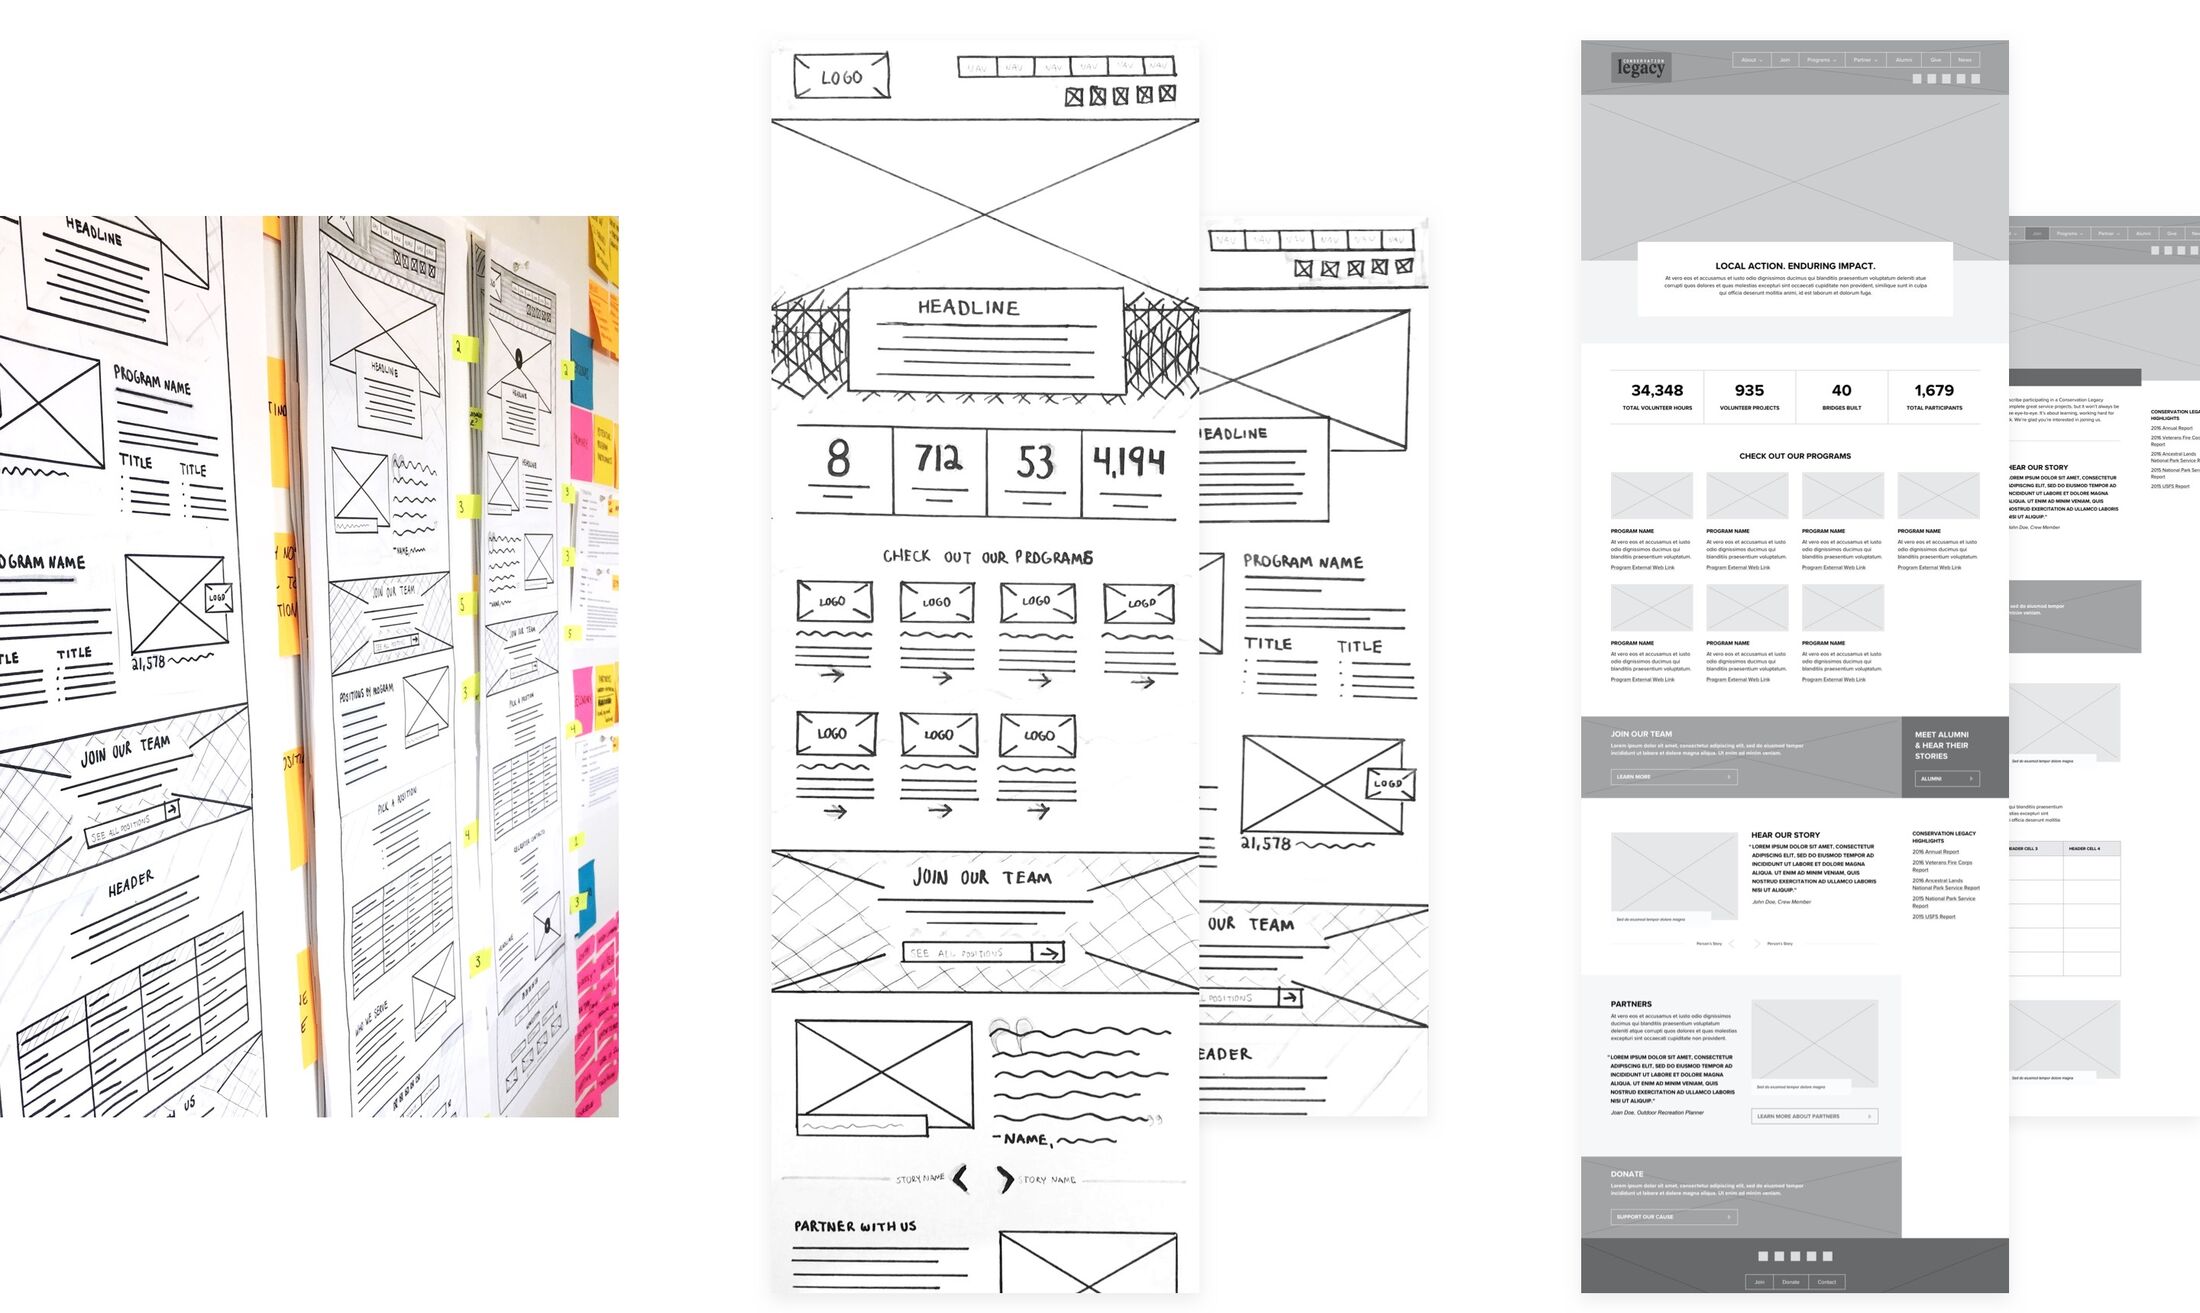 Content outlines and wireframes for the Conservation Legacy site